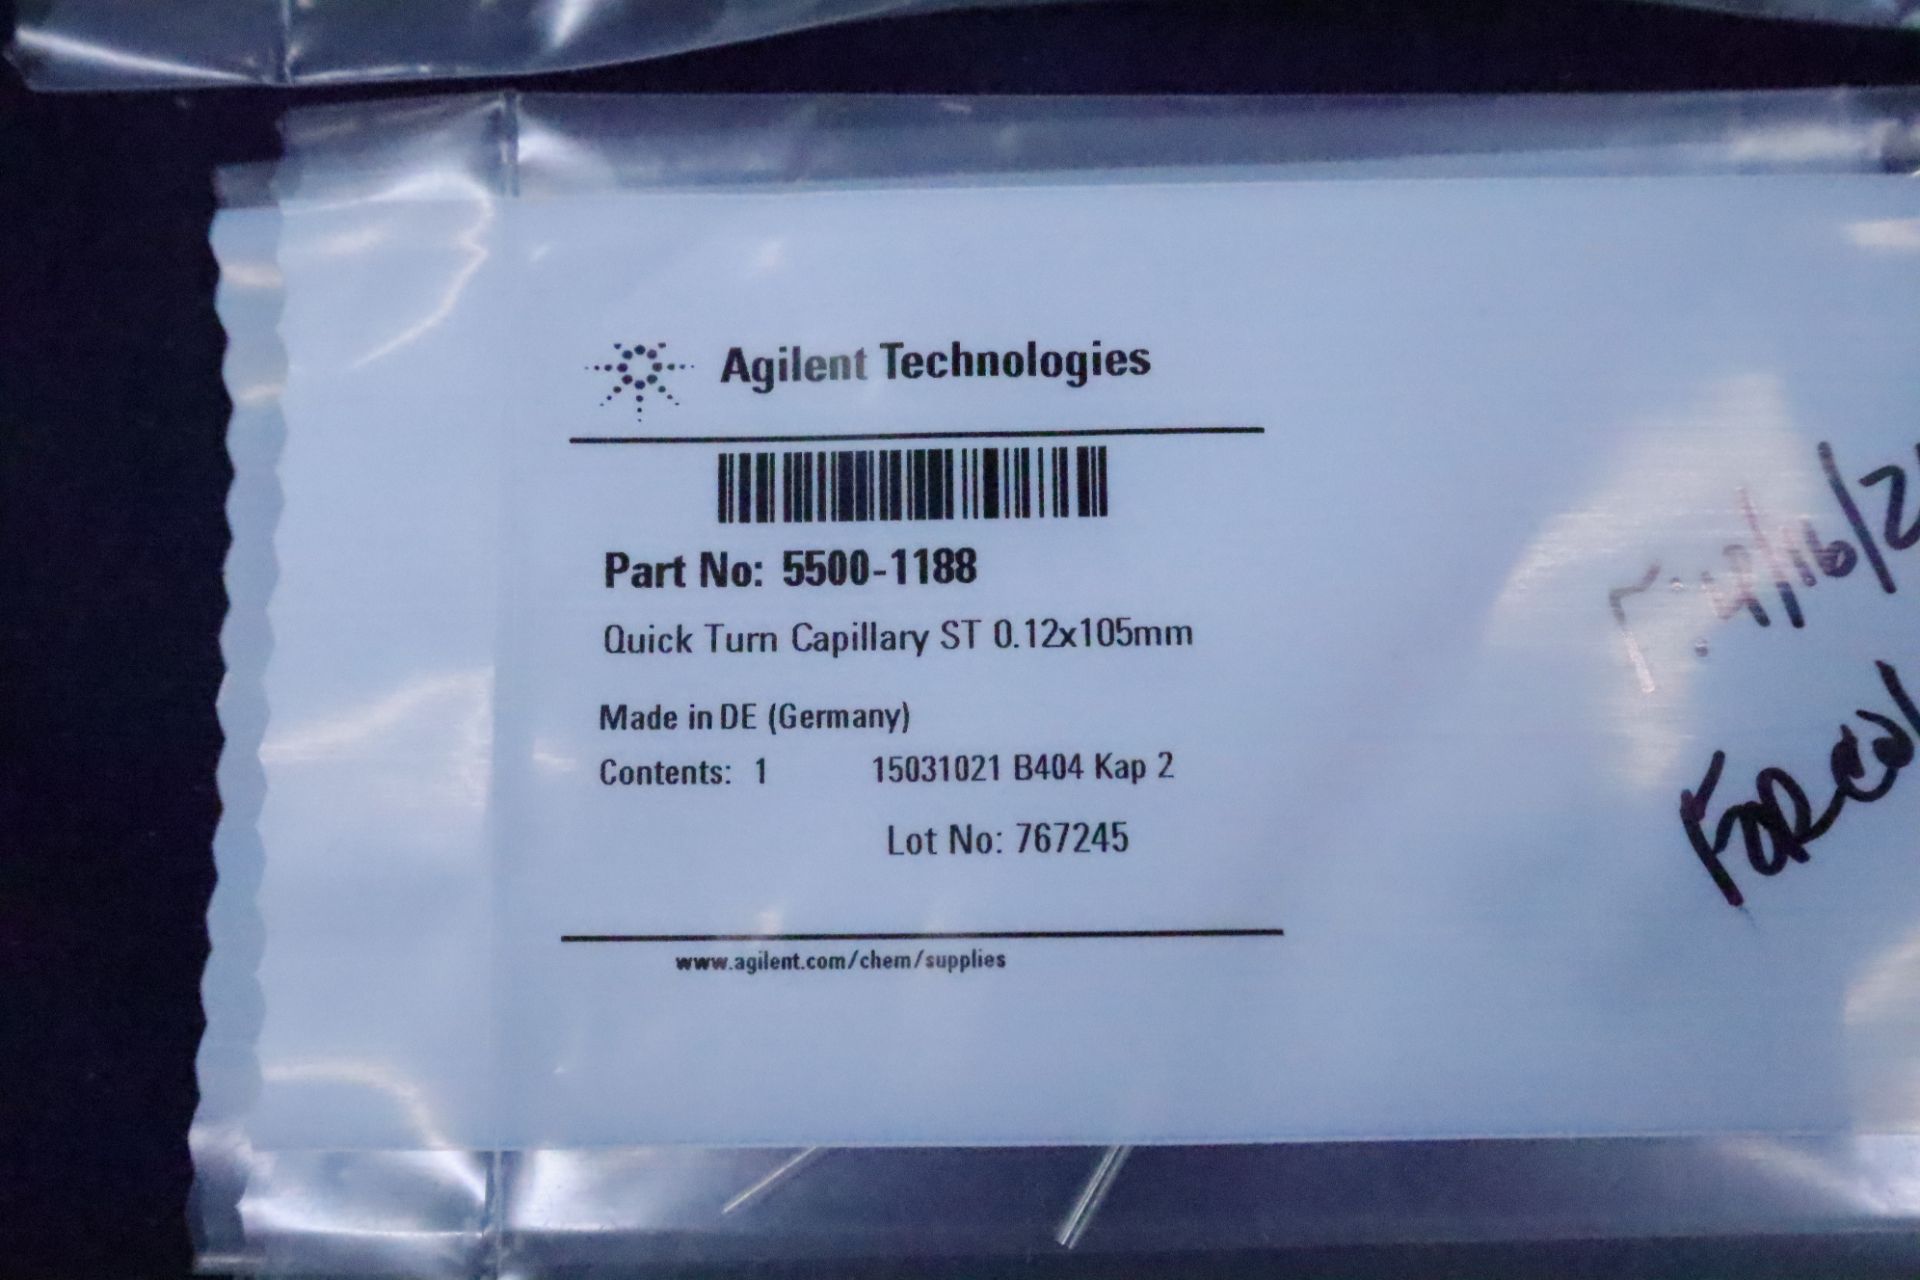 (NIB) Agilent Technologies OEM Replacement Parts for LC/MS Machines - Image 13 of 28